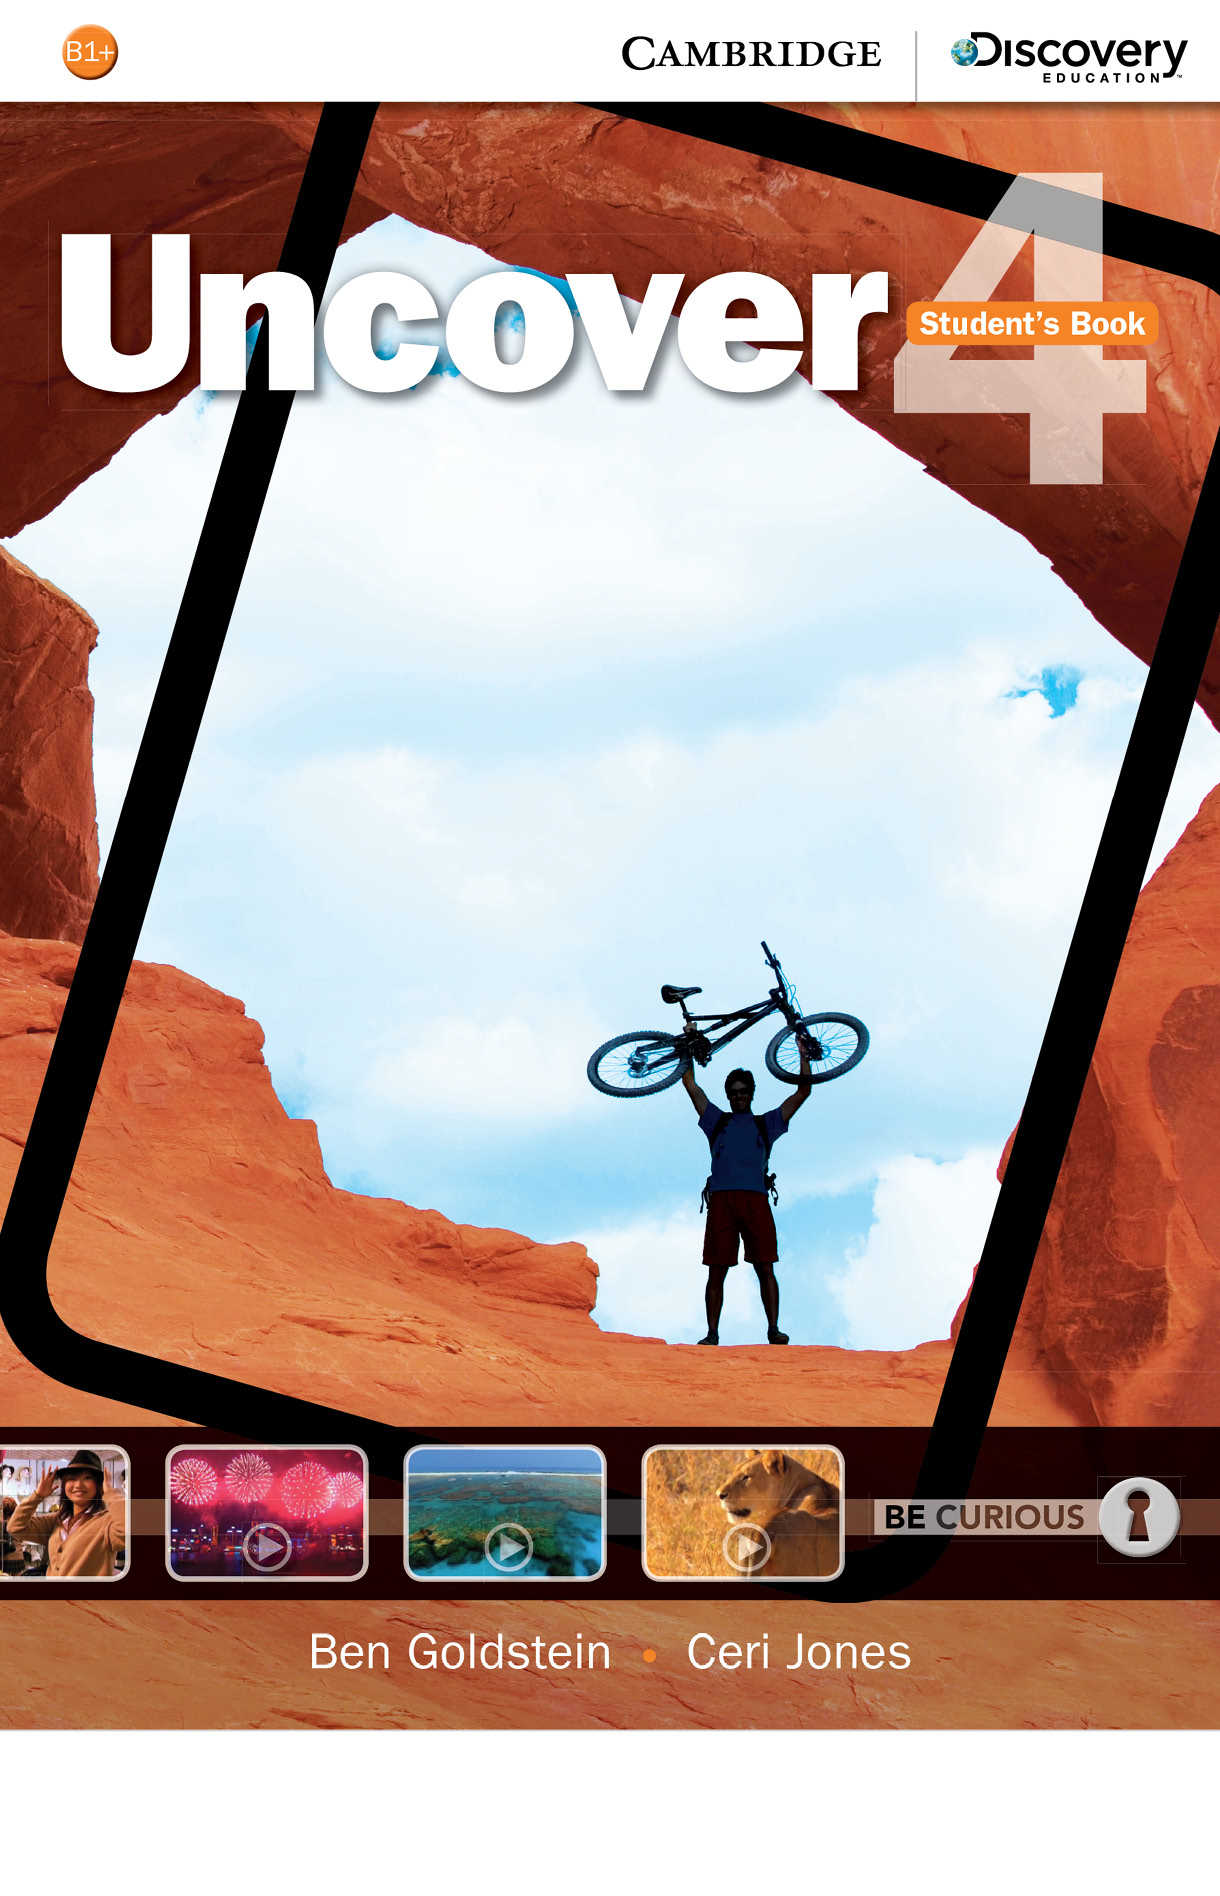 Book cover for Uncover student's book volume 4. It has a person holding a bike high above the head, surrounded by clay mountains.